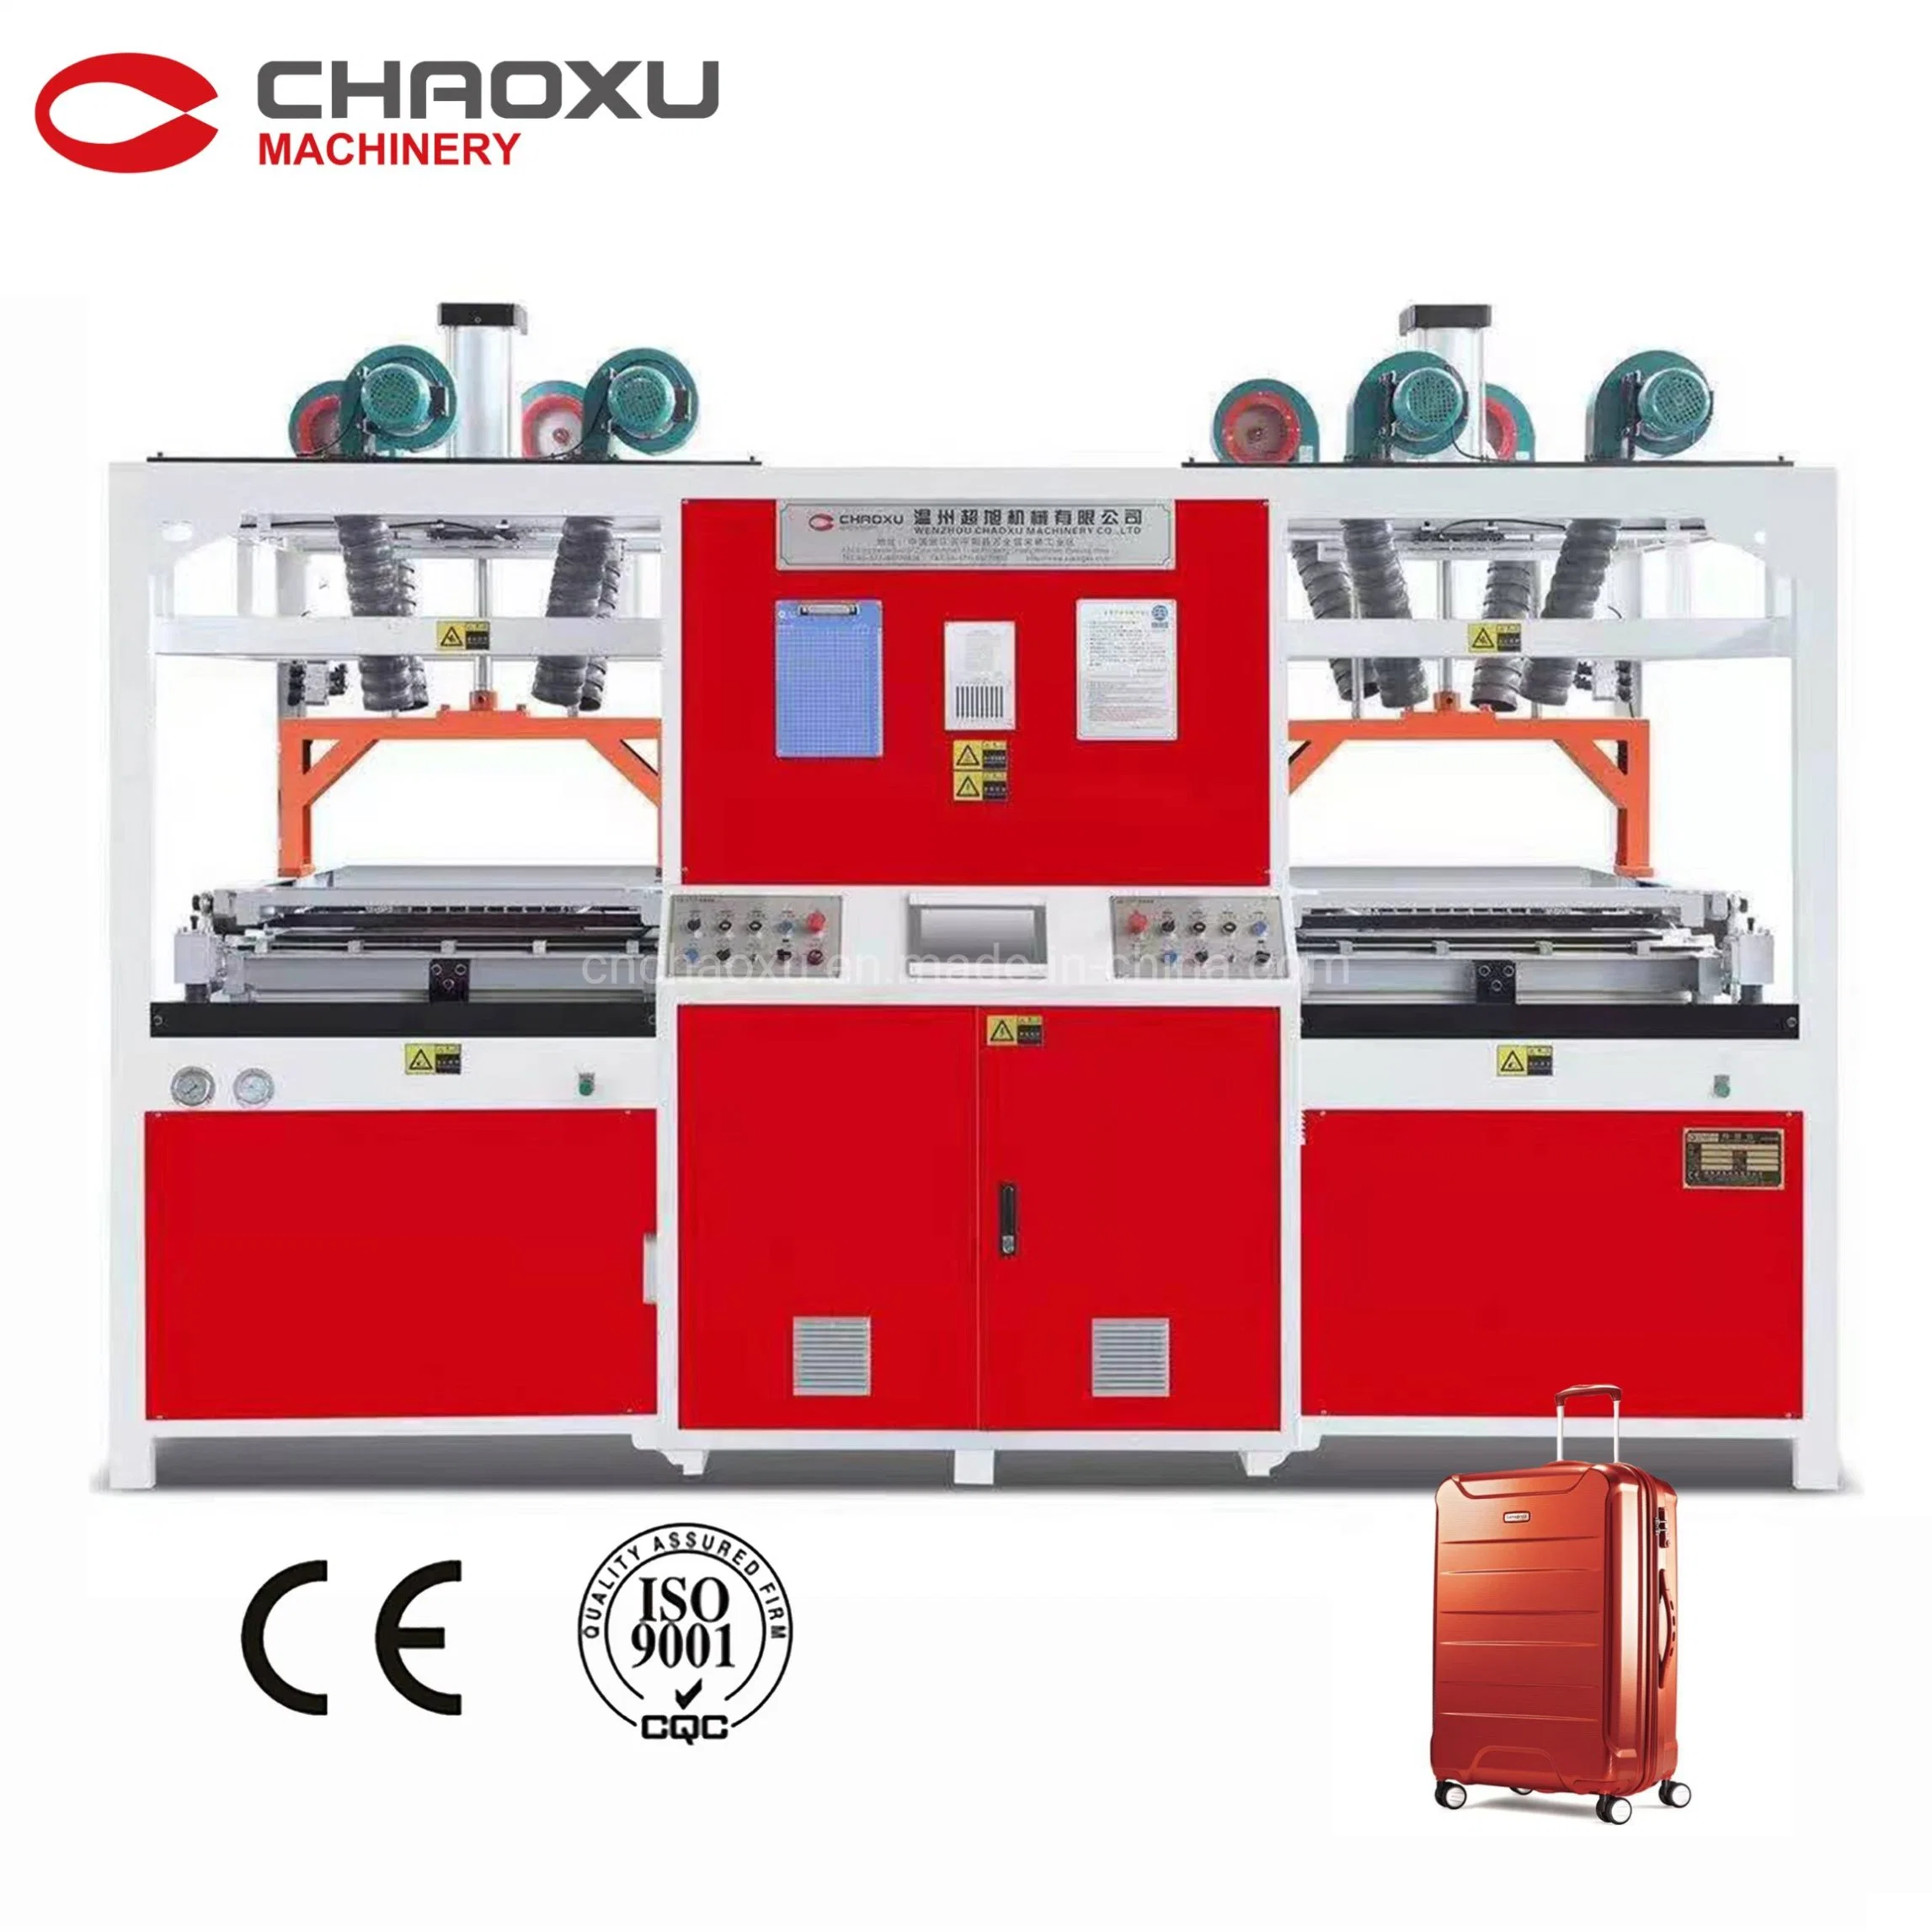 Chaoxu Chinese Made Travelling Case Thermo Forming Machine